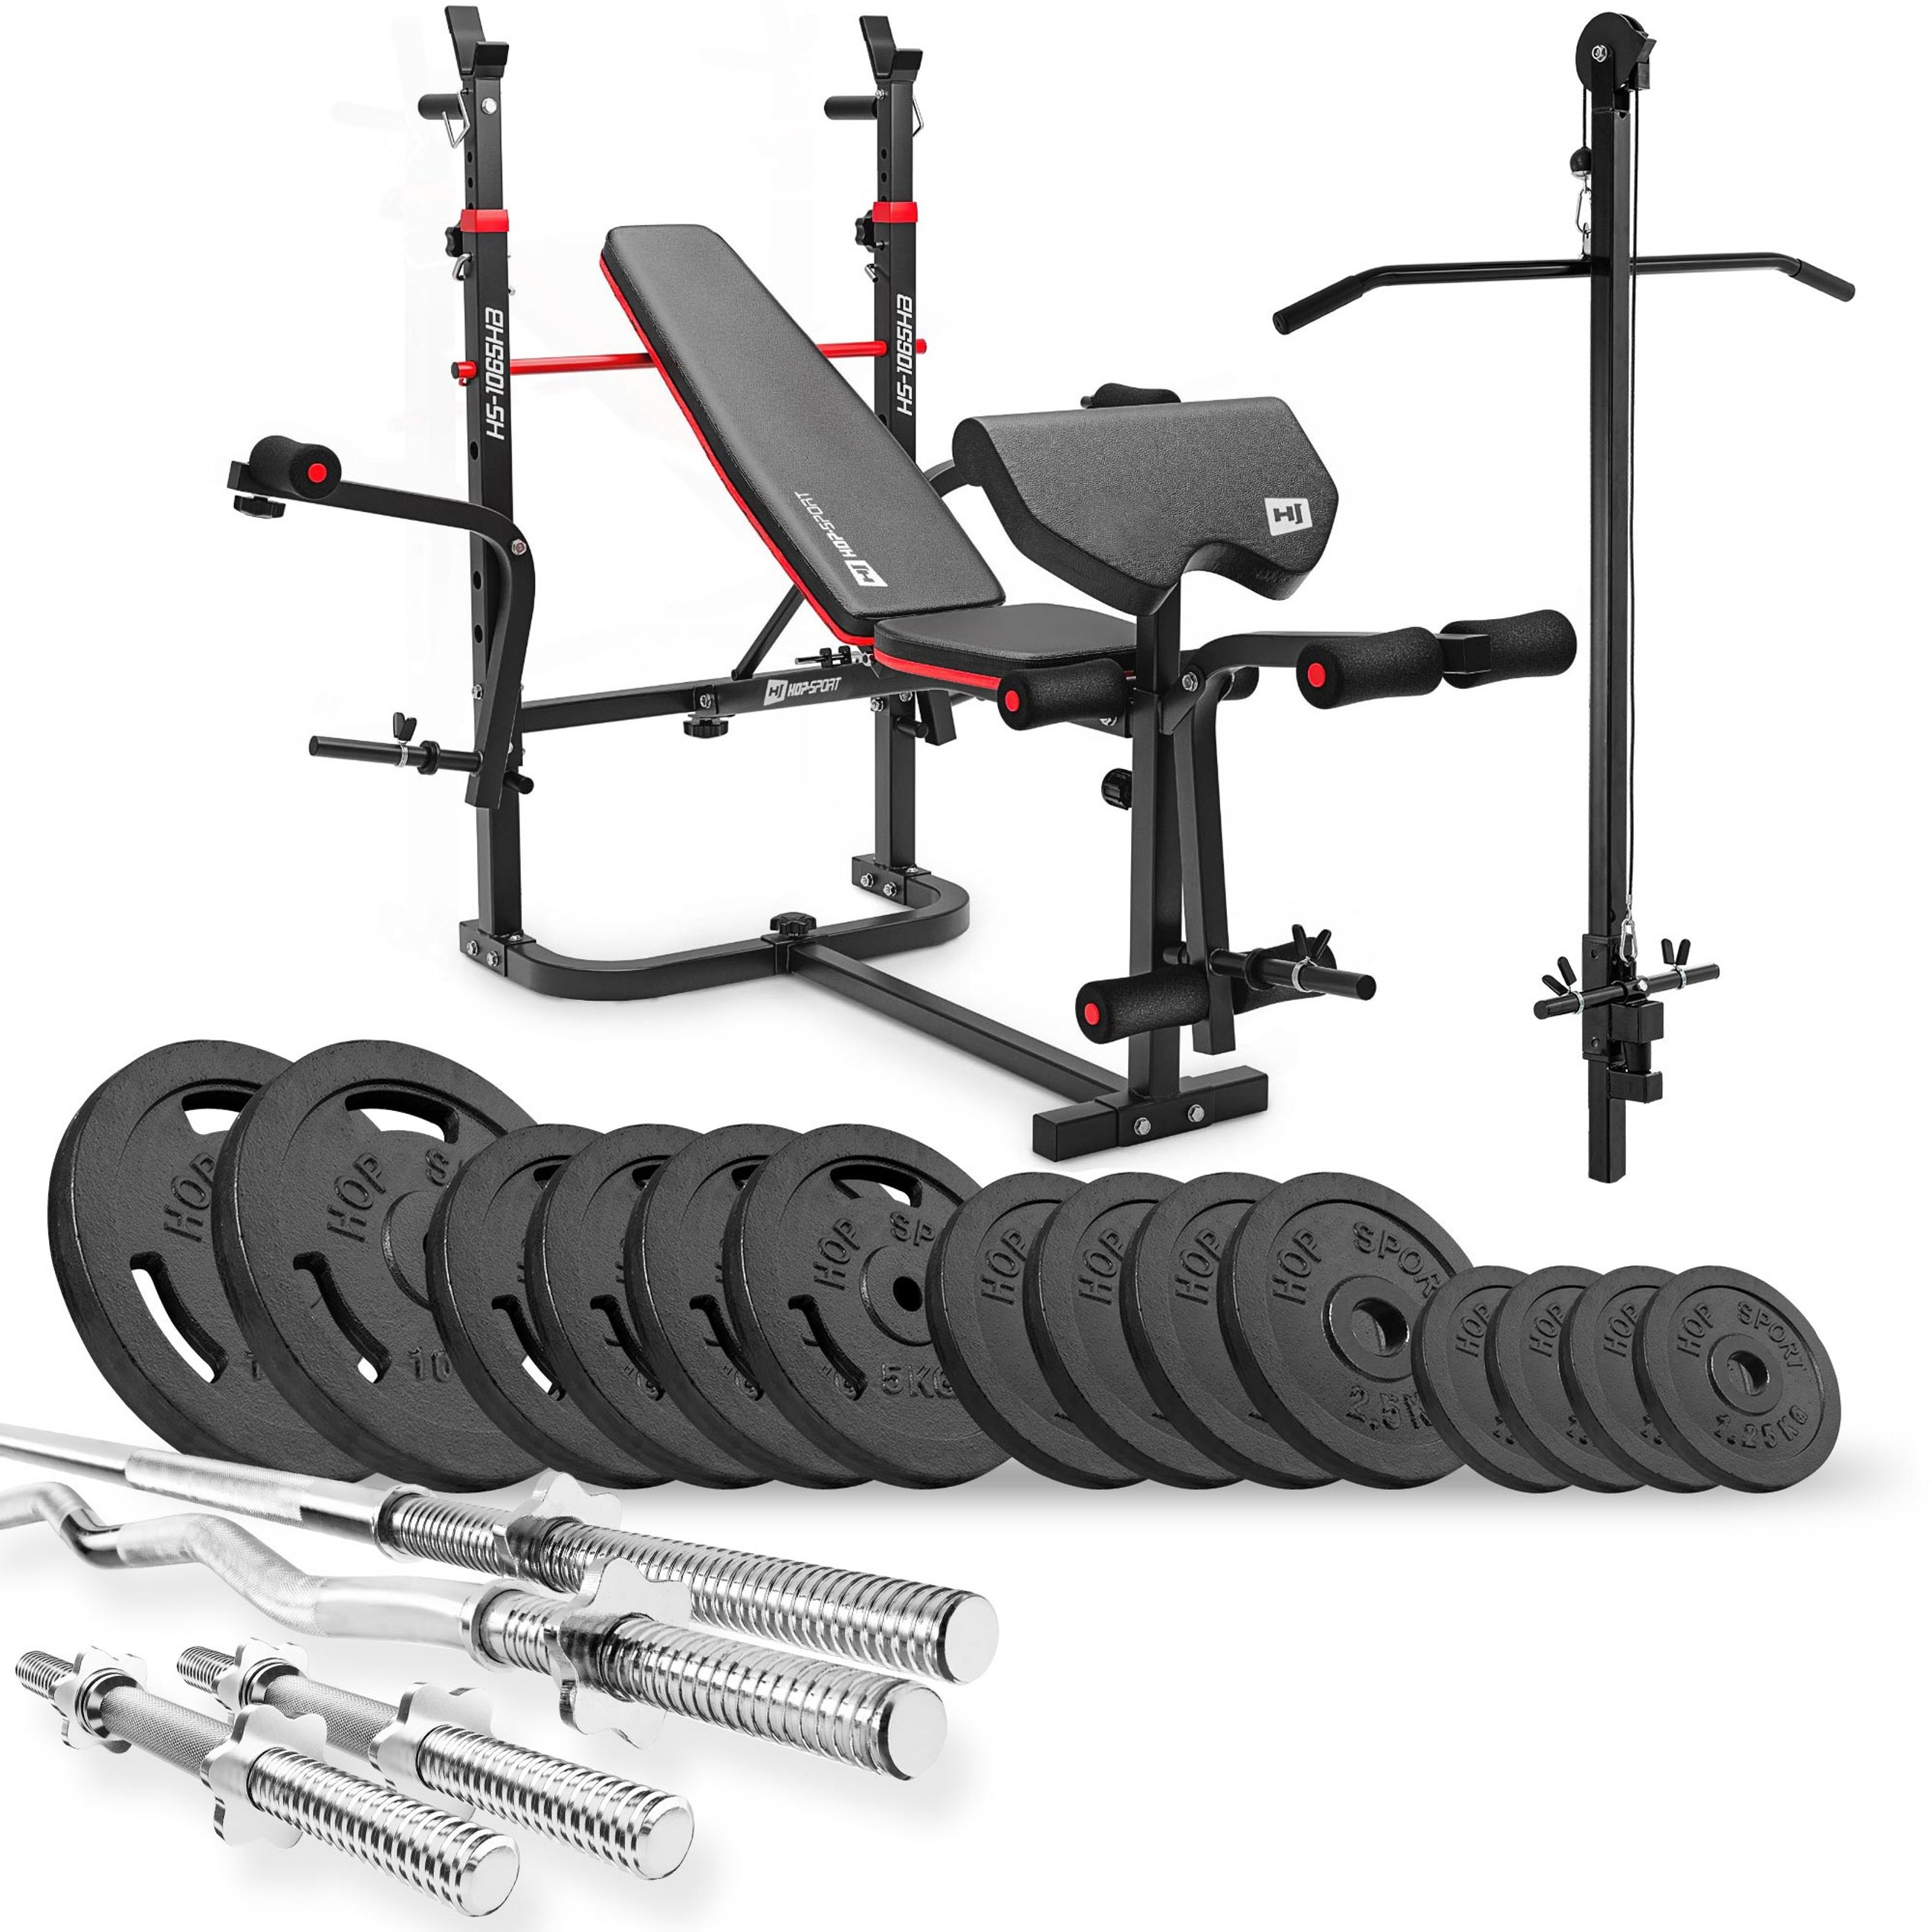 Strong 76 kg Cast Iron Barbell Set with HS-1065 Weight Bench